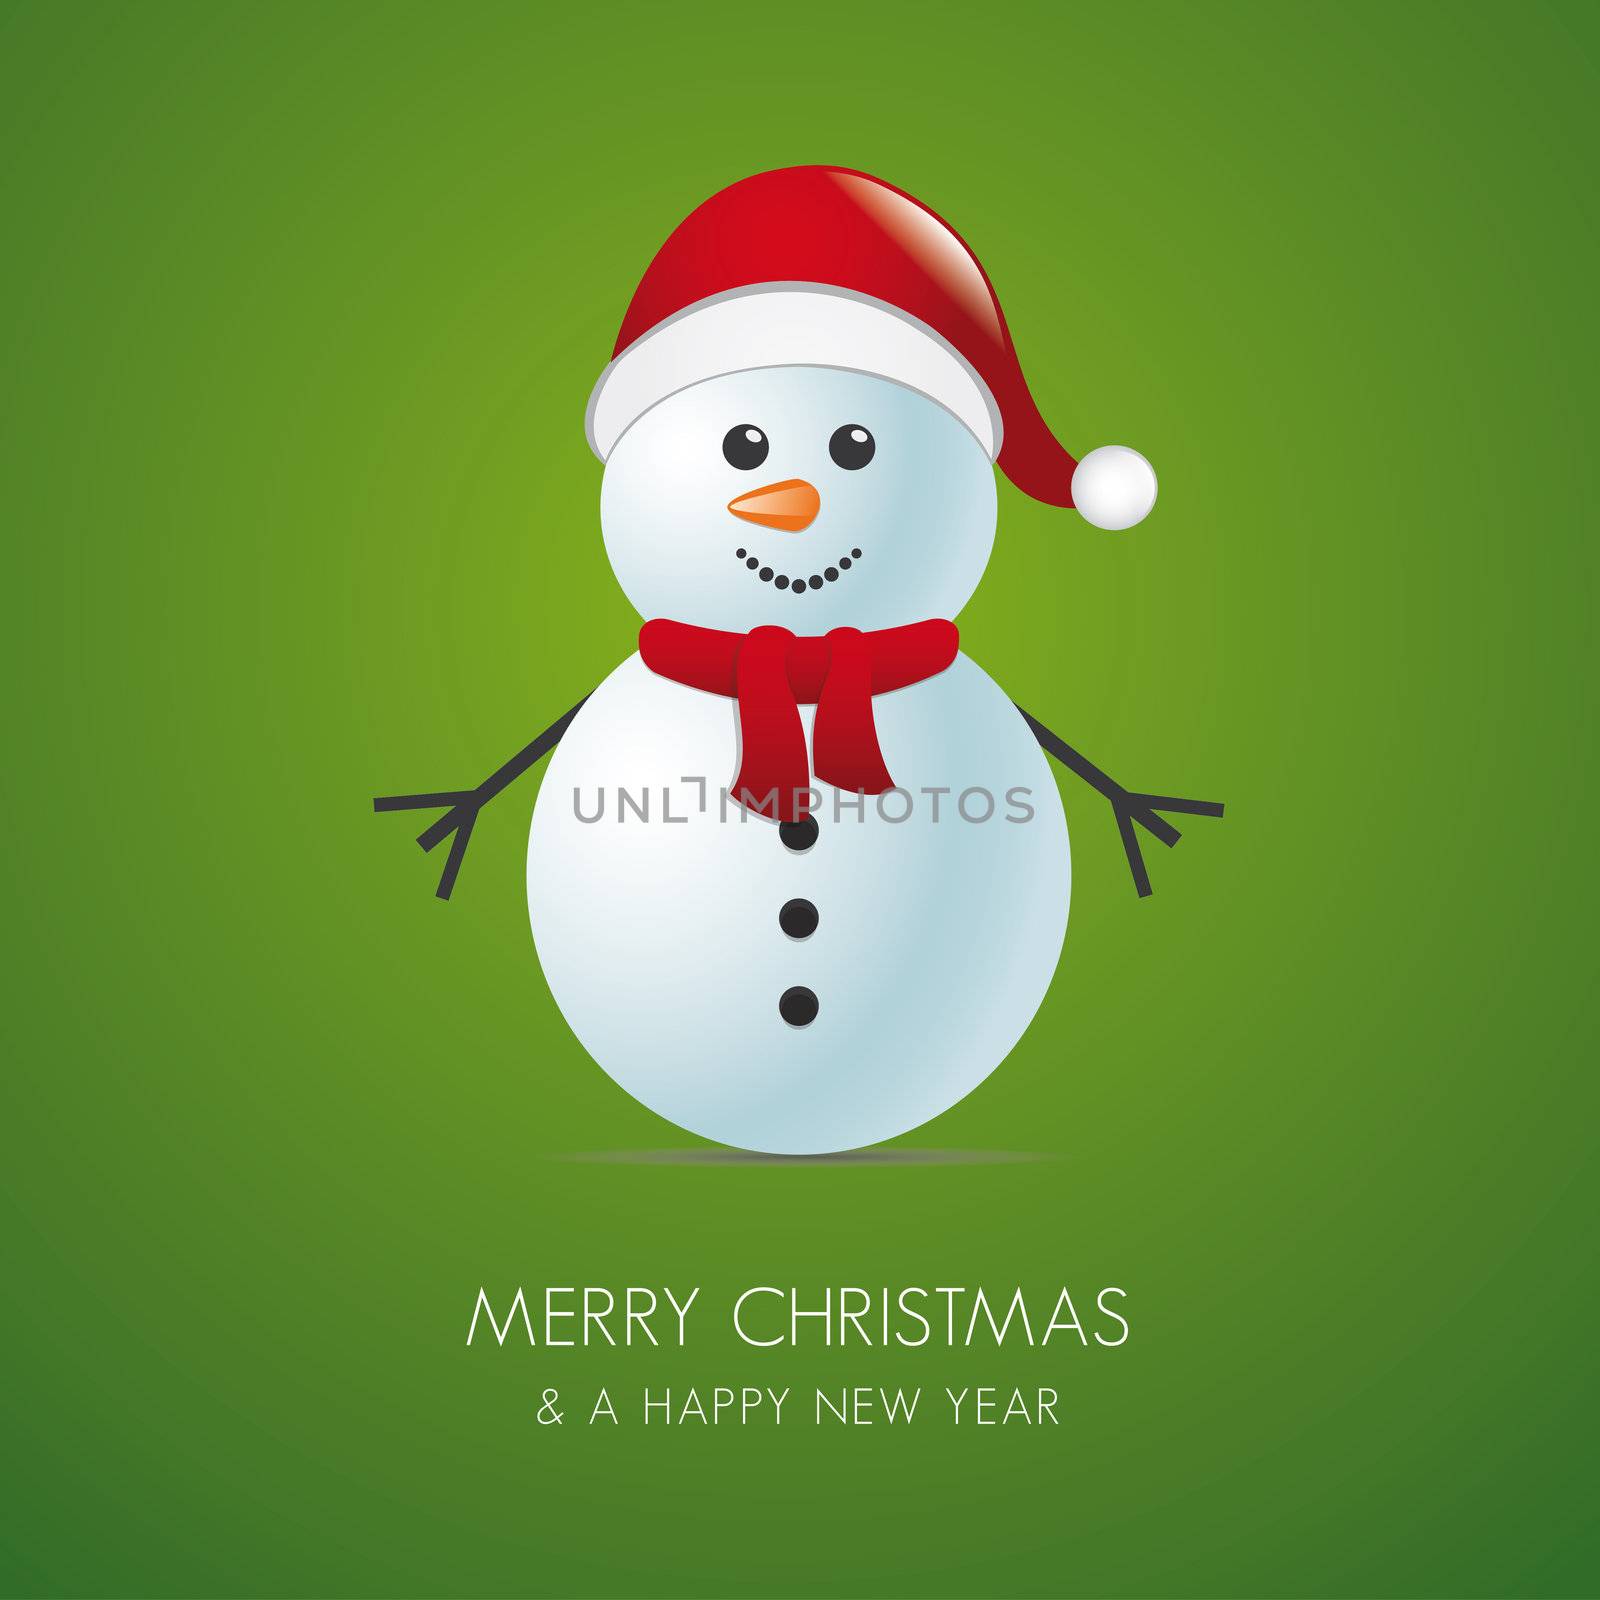 snowman with scarf and santa claus hat